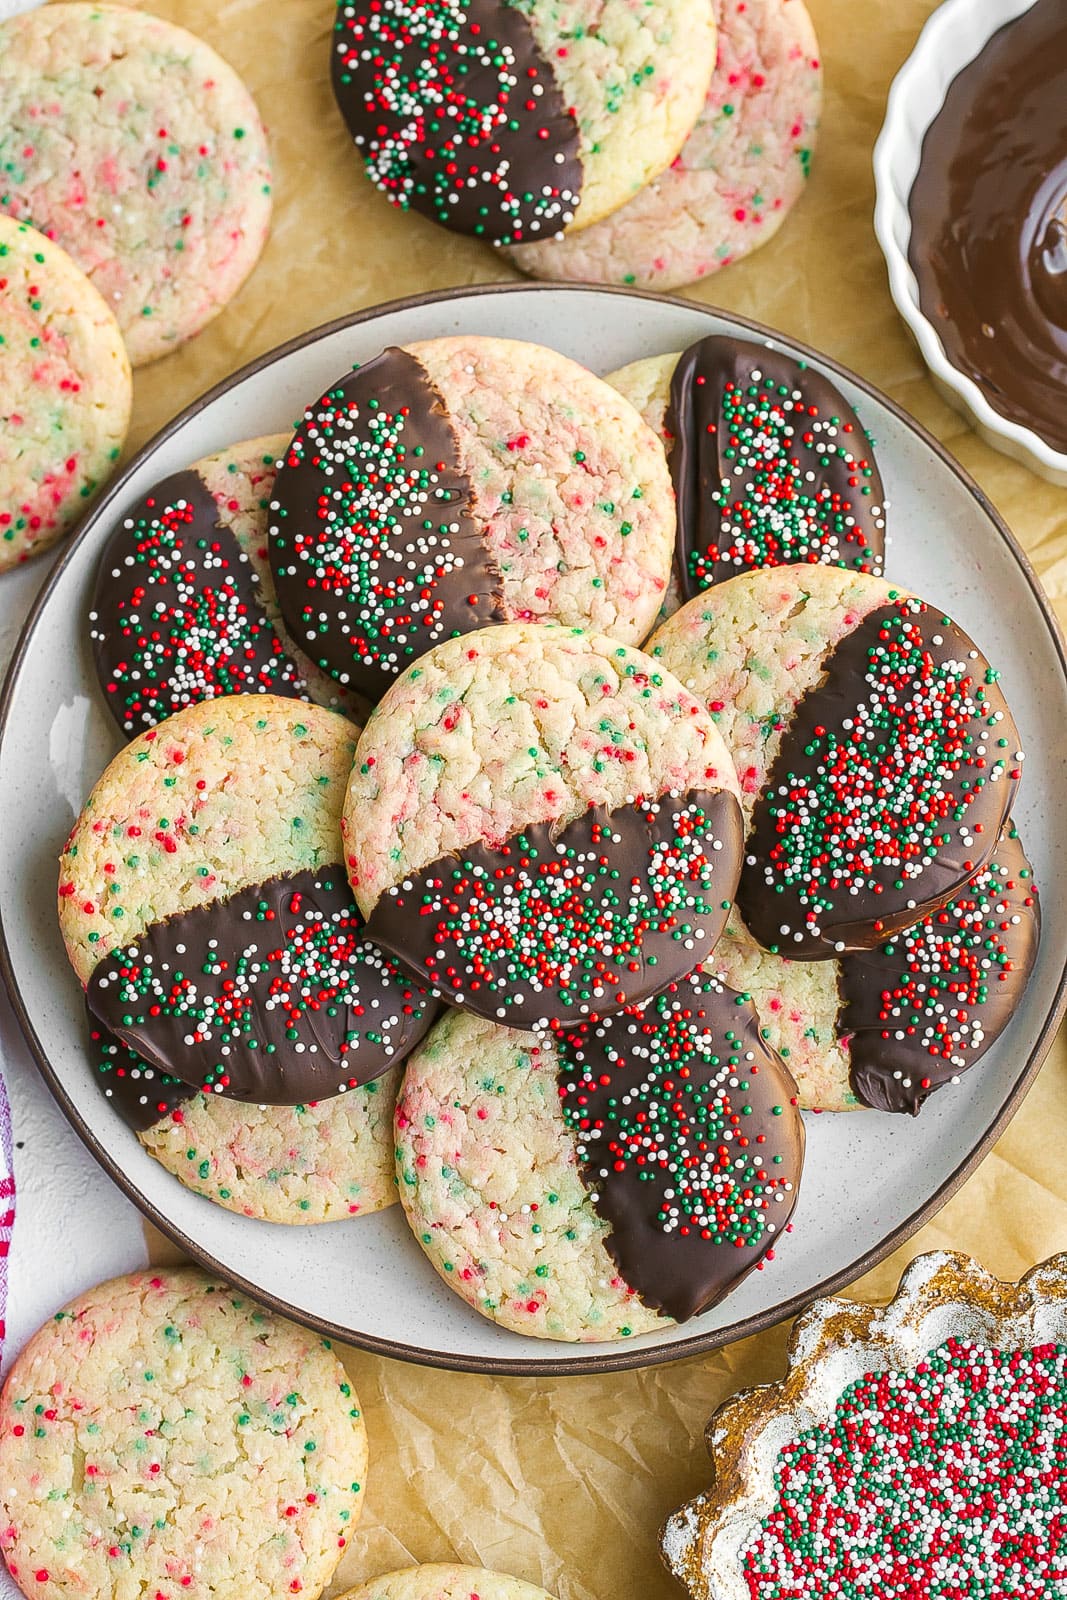 Plate of chocolate dipped cookies with sprinkles.